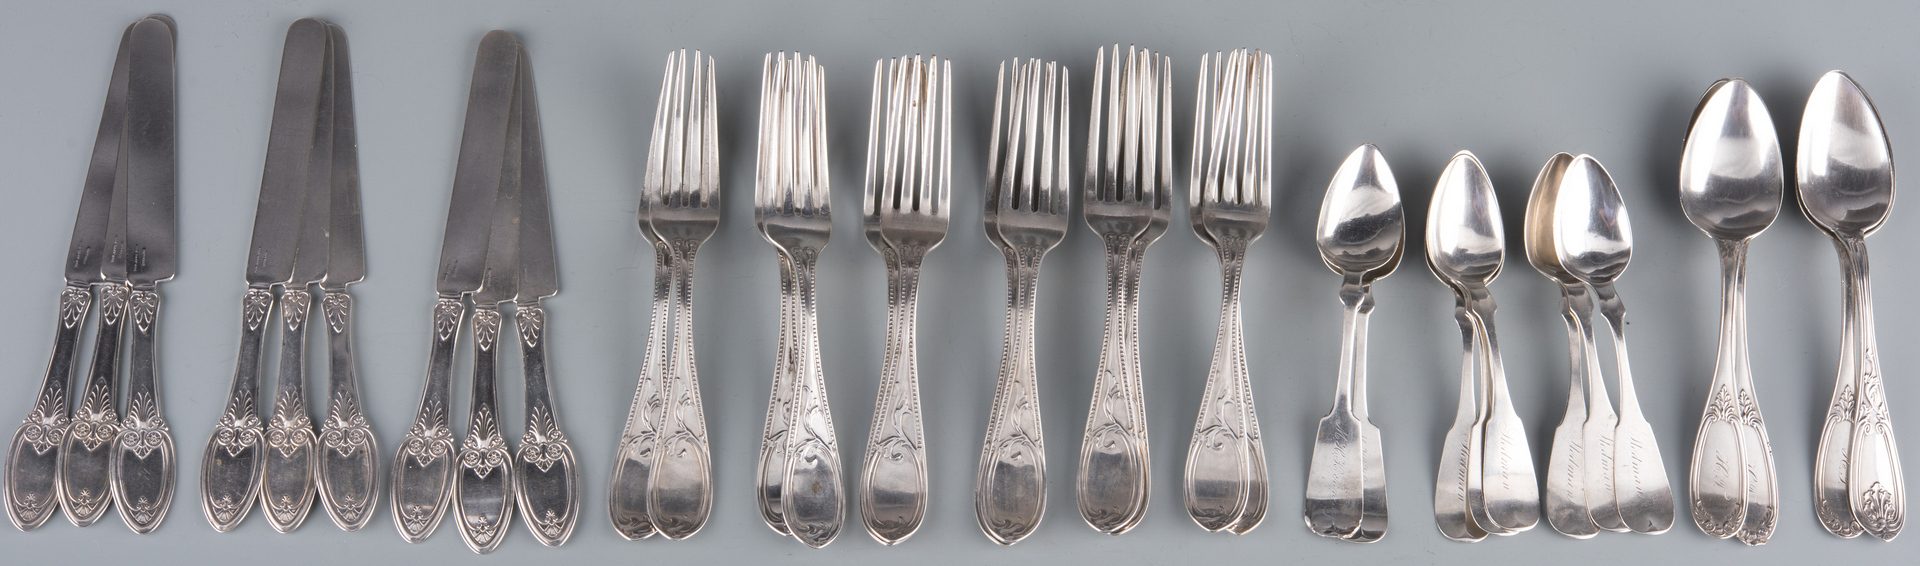 Lot 137: 33 Pcs. Coin and Sterling Flatware inc forks, knives